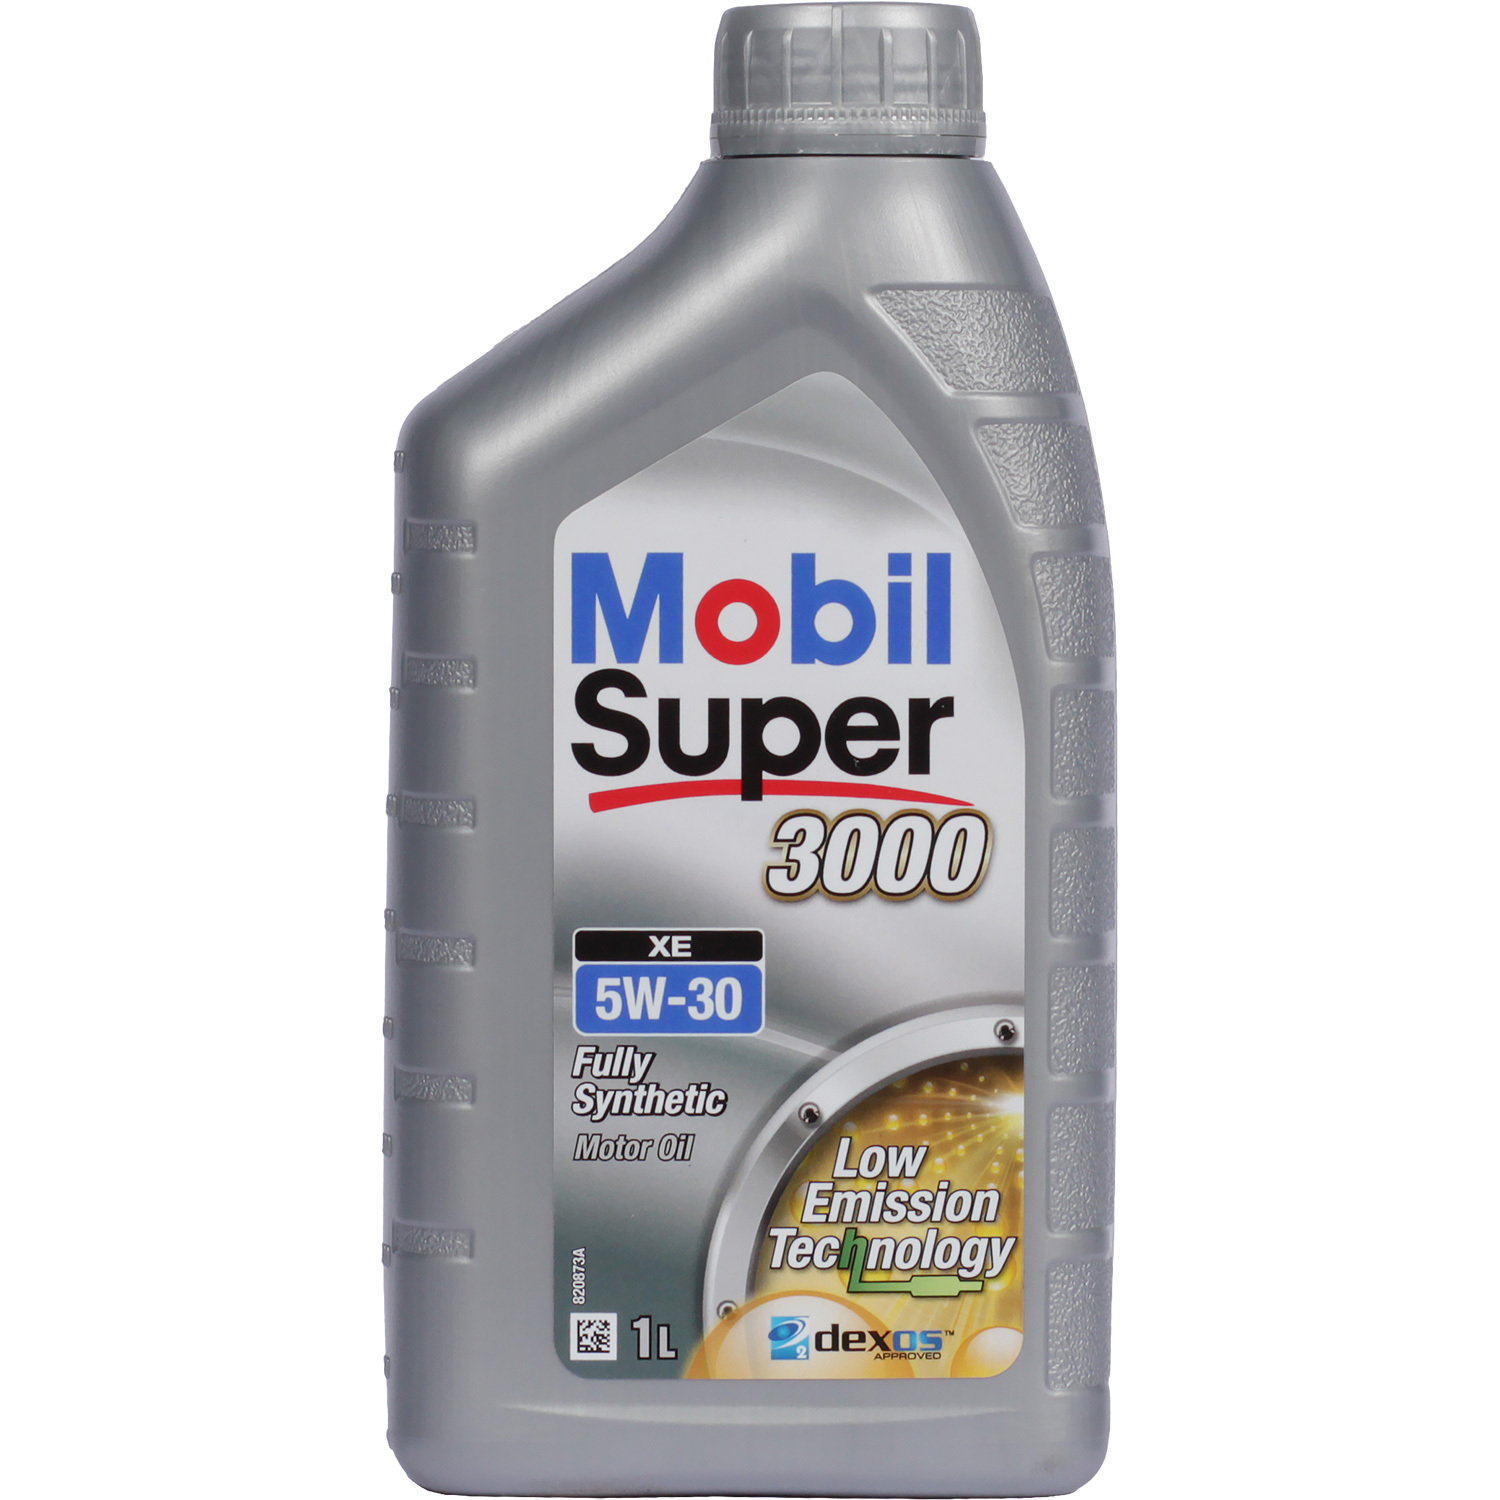 Mobil Моторное масло Mobil Super 3000 XE 5W-30, 1 л масло моторное mobil 1 esp 5w 30 4л